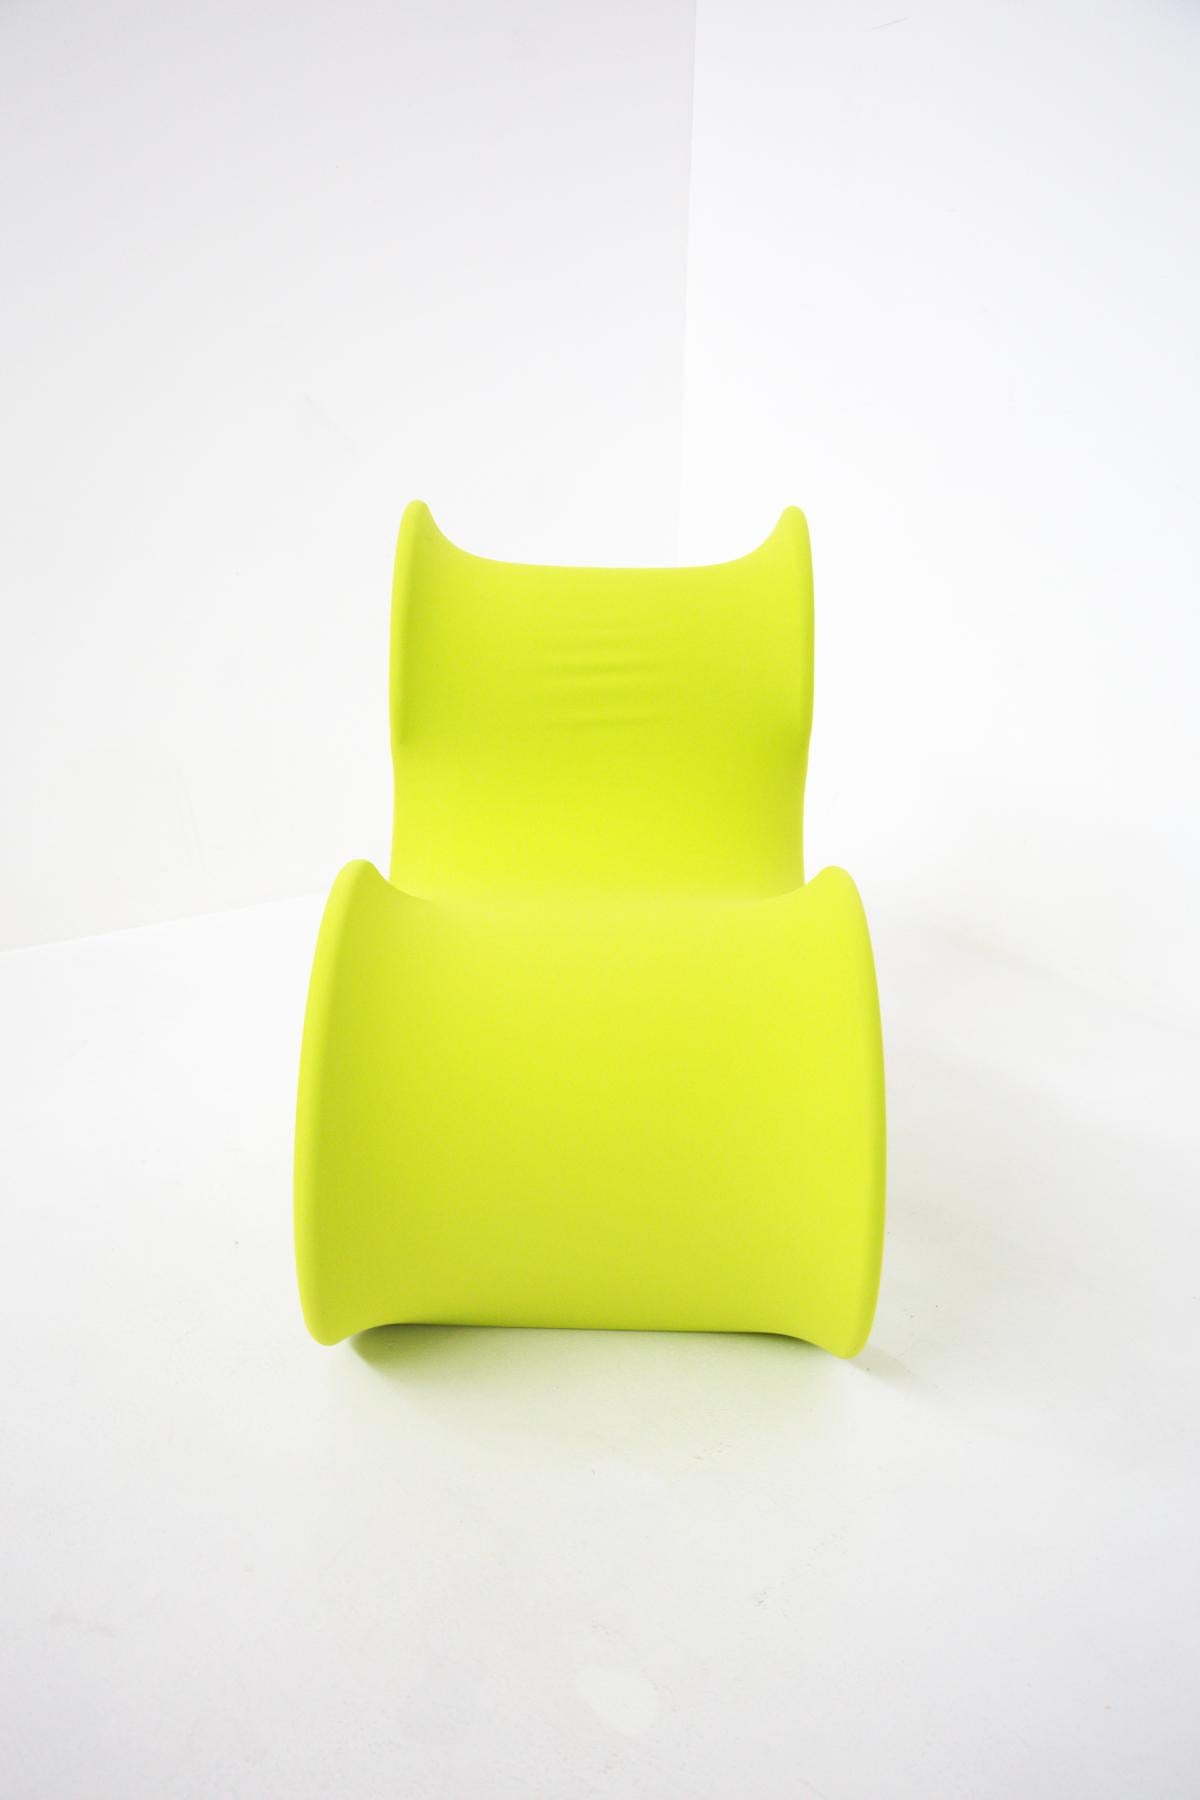 Gianni Pareschi Armchair Fiocco Acid Green for Busnelli For Sale 10